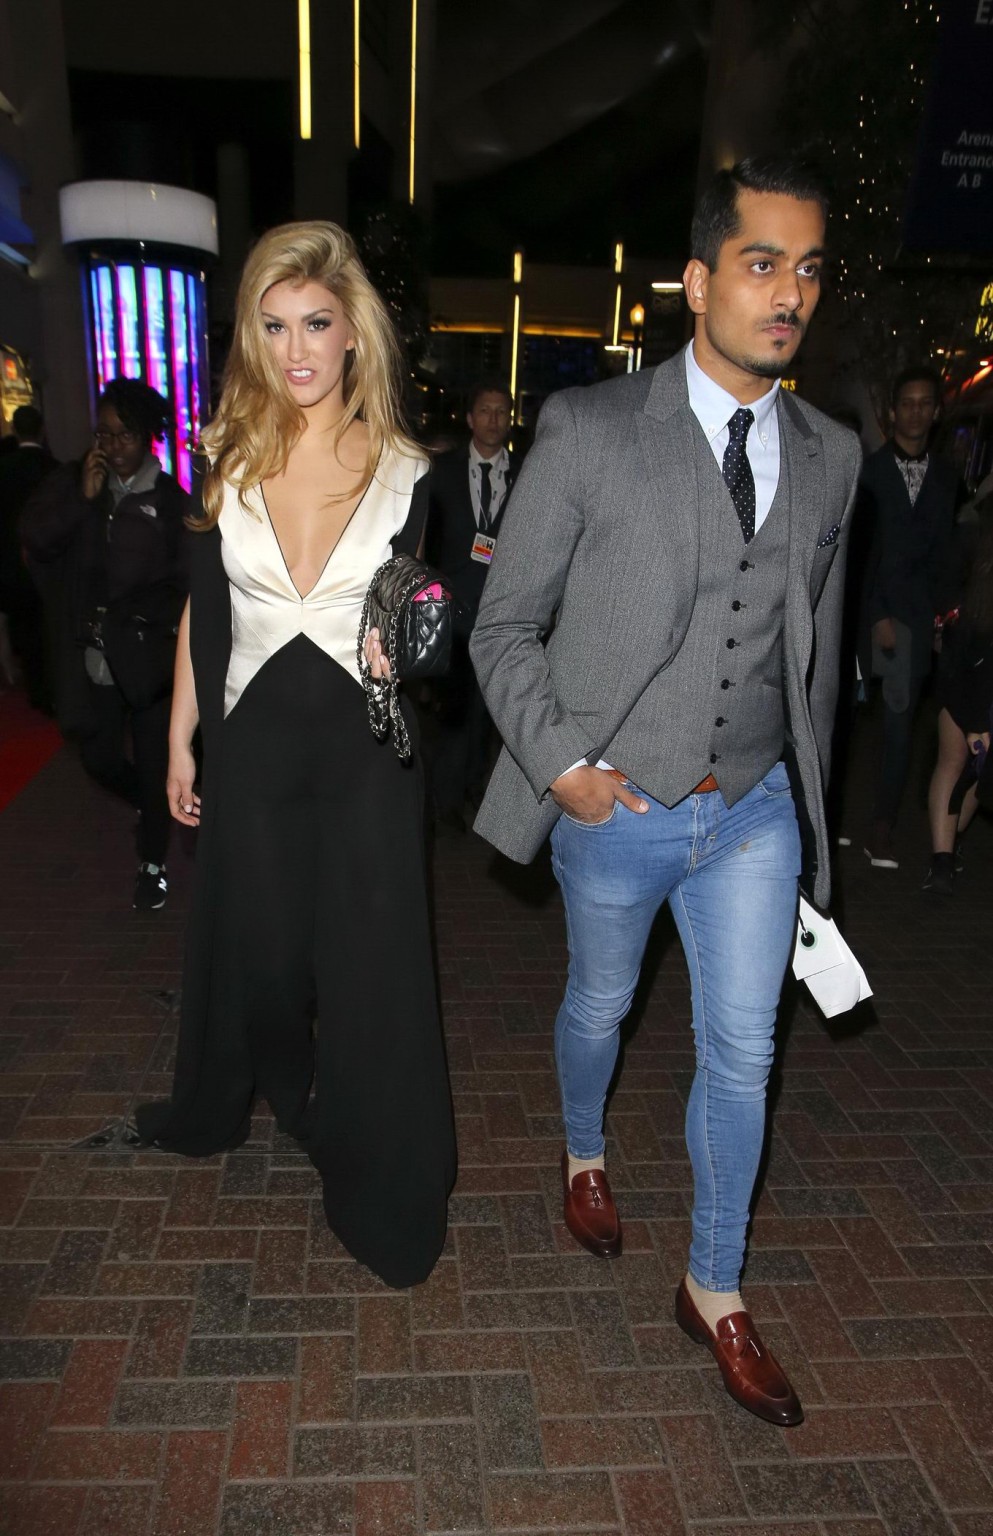 Amy willerton cleavy see through to thong lors des brit awards 2014 à londres.
 #75204003